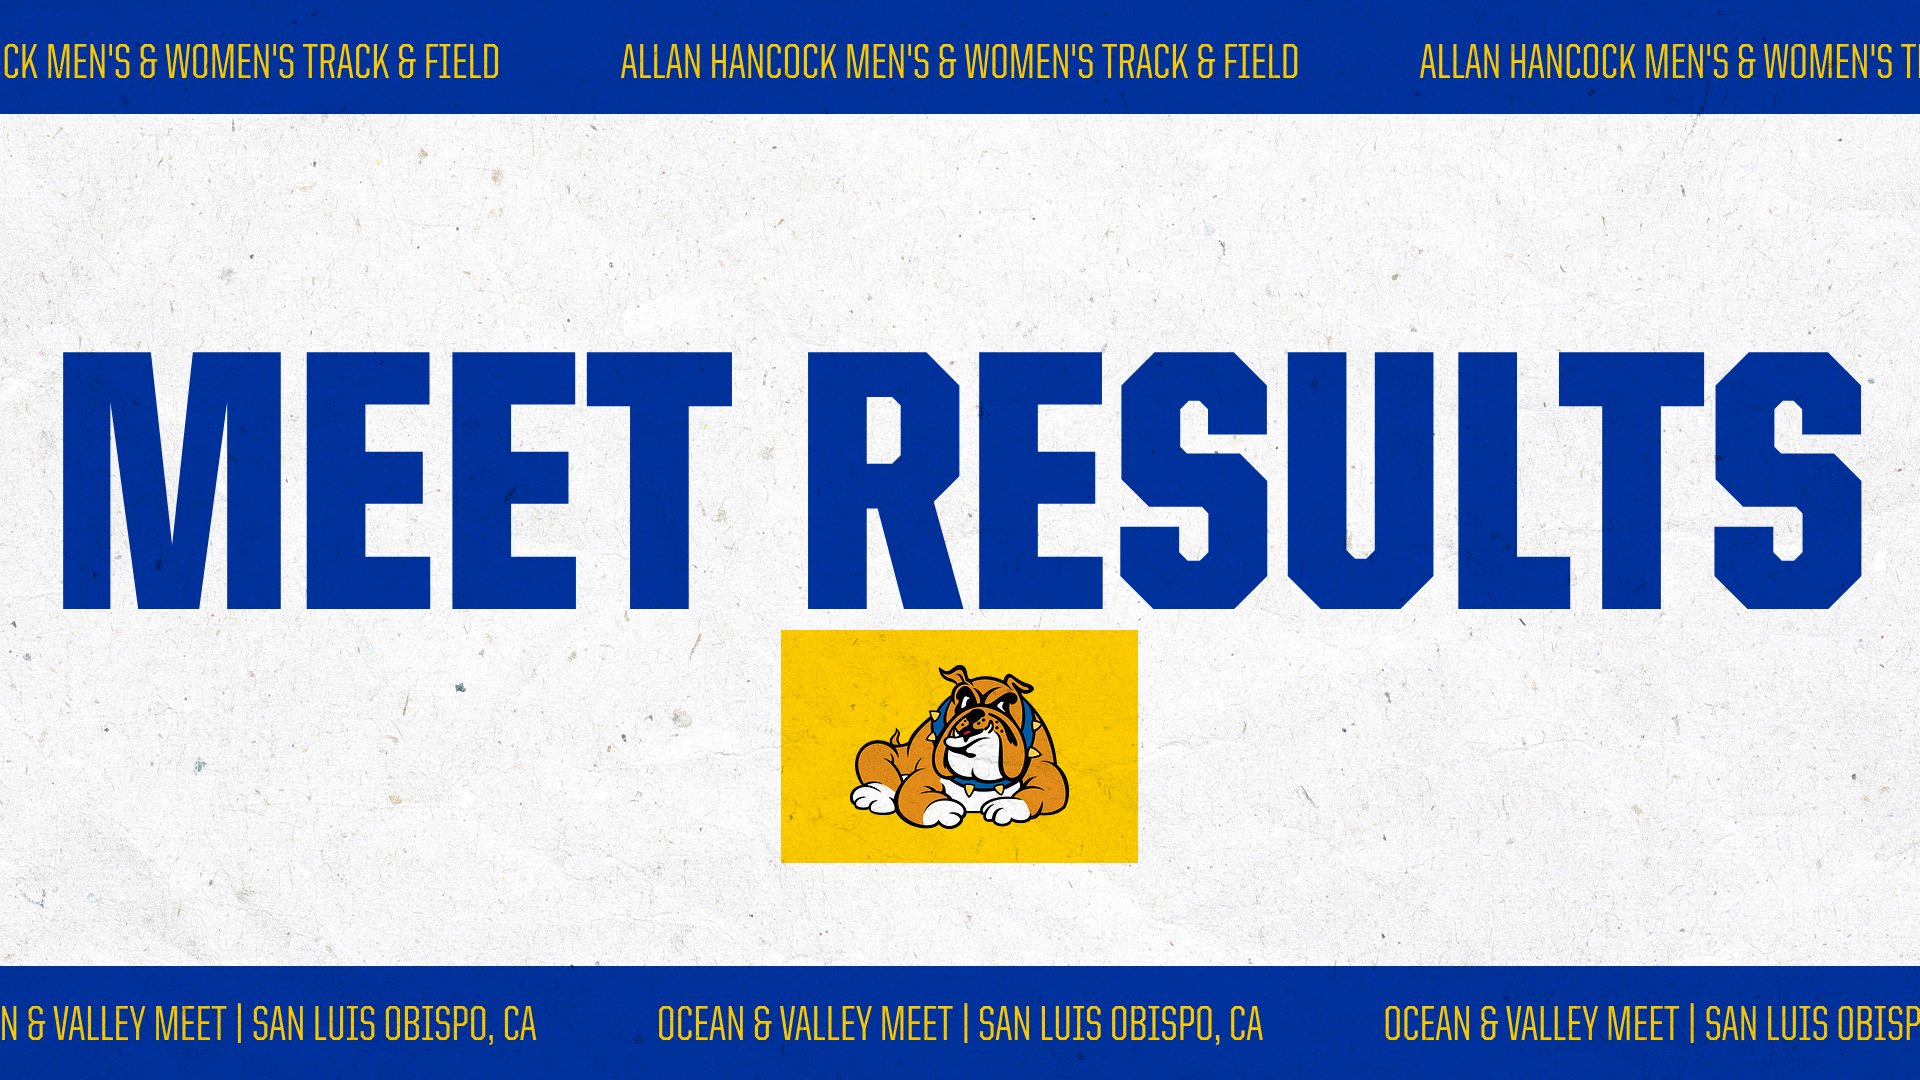 Track & Field Continues Competition at Ocean & Valley Meet